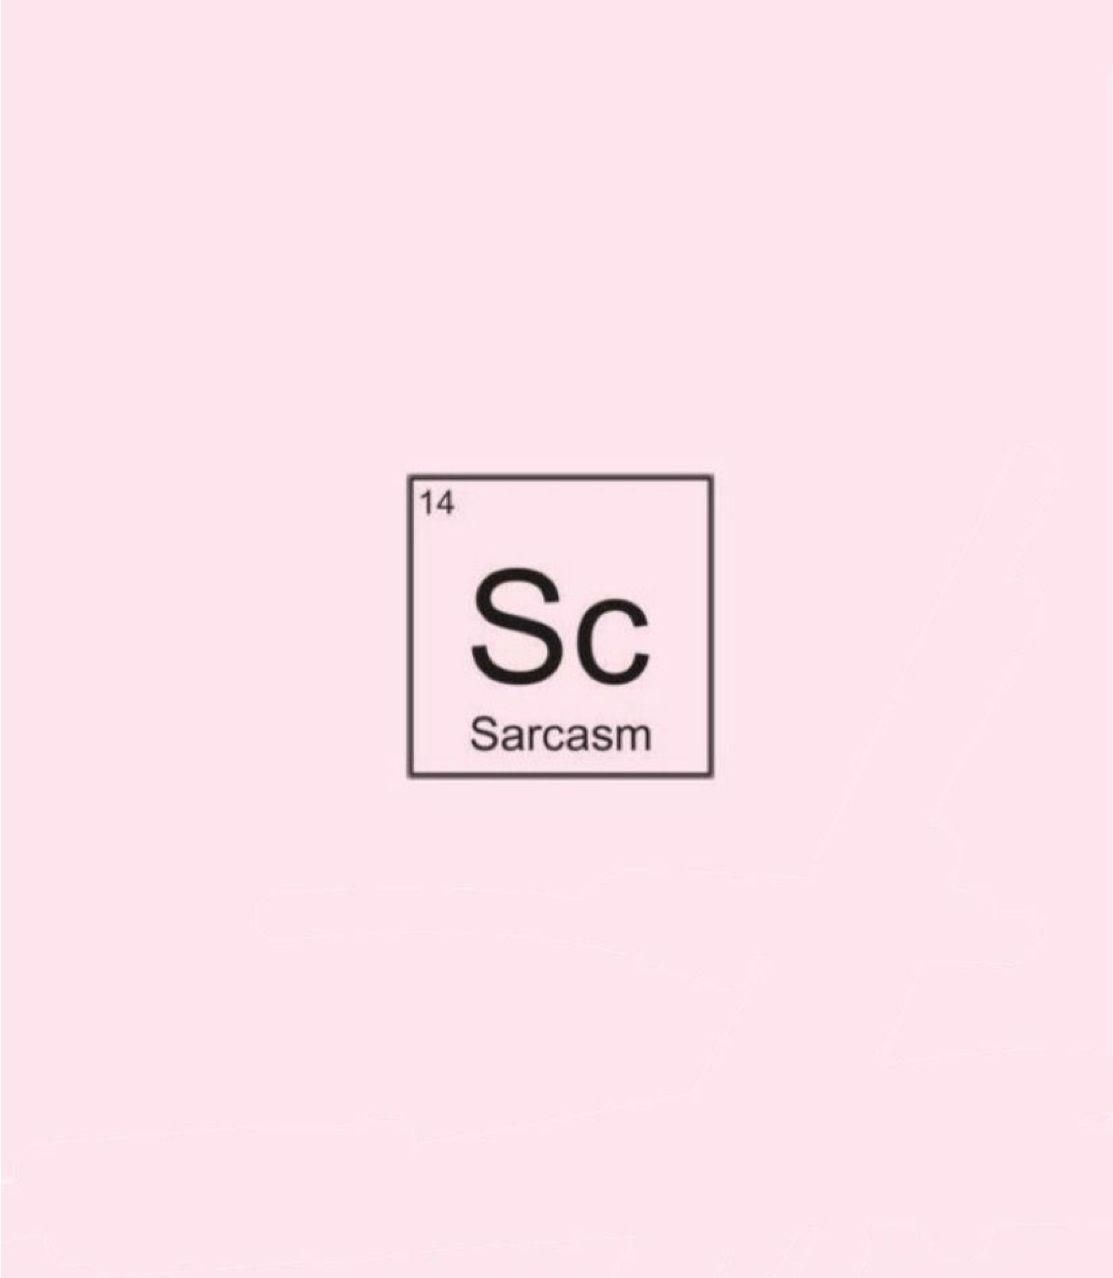 This is my section of the periodic table